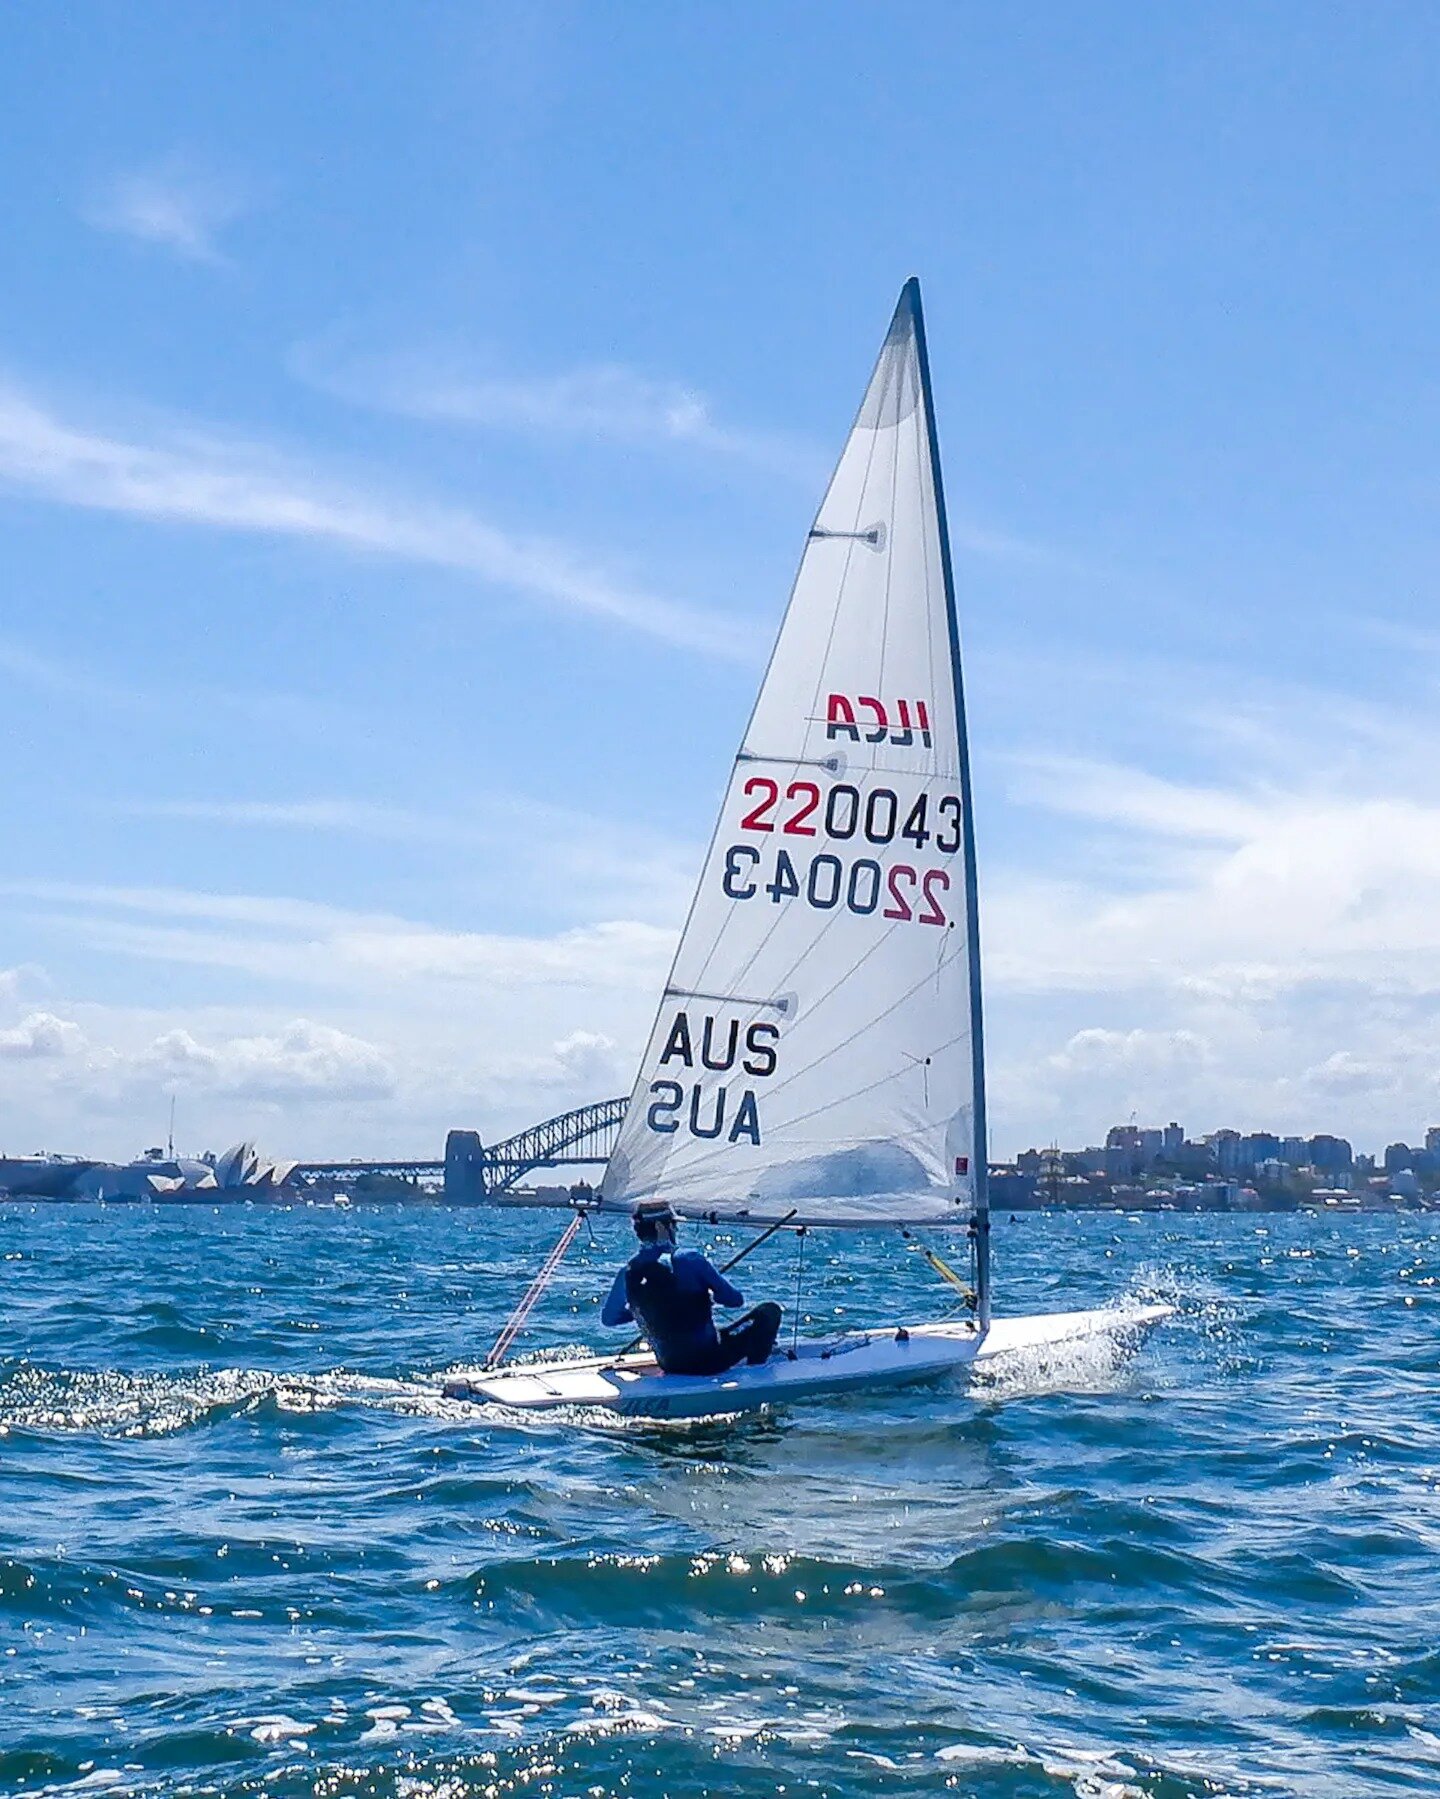 Sure, one more sail before Christmas 😬😎🎄

#lasersailing #laserclass #ilcasailing #ilca #dinghysailing #sailing #doublebaysailingclub #sydney #sydneyharbour